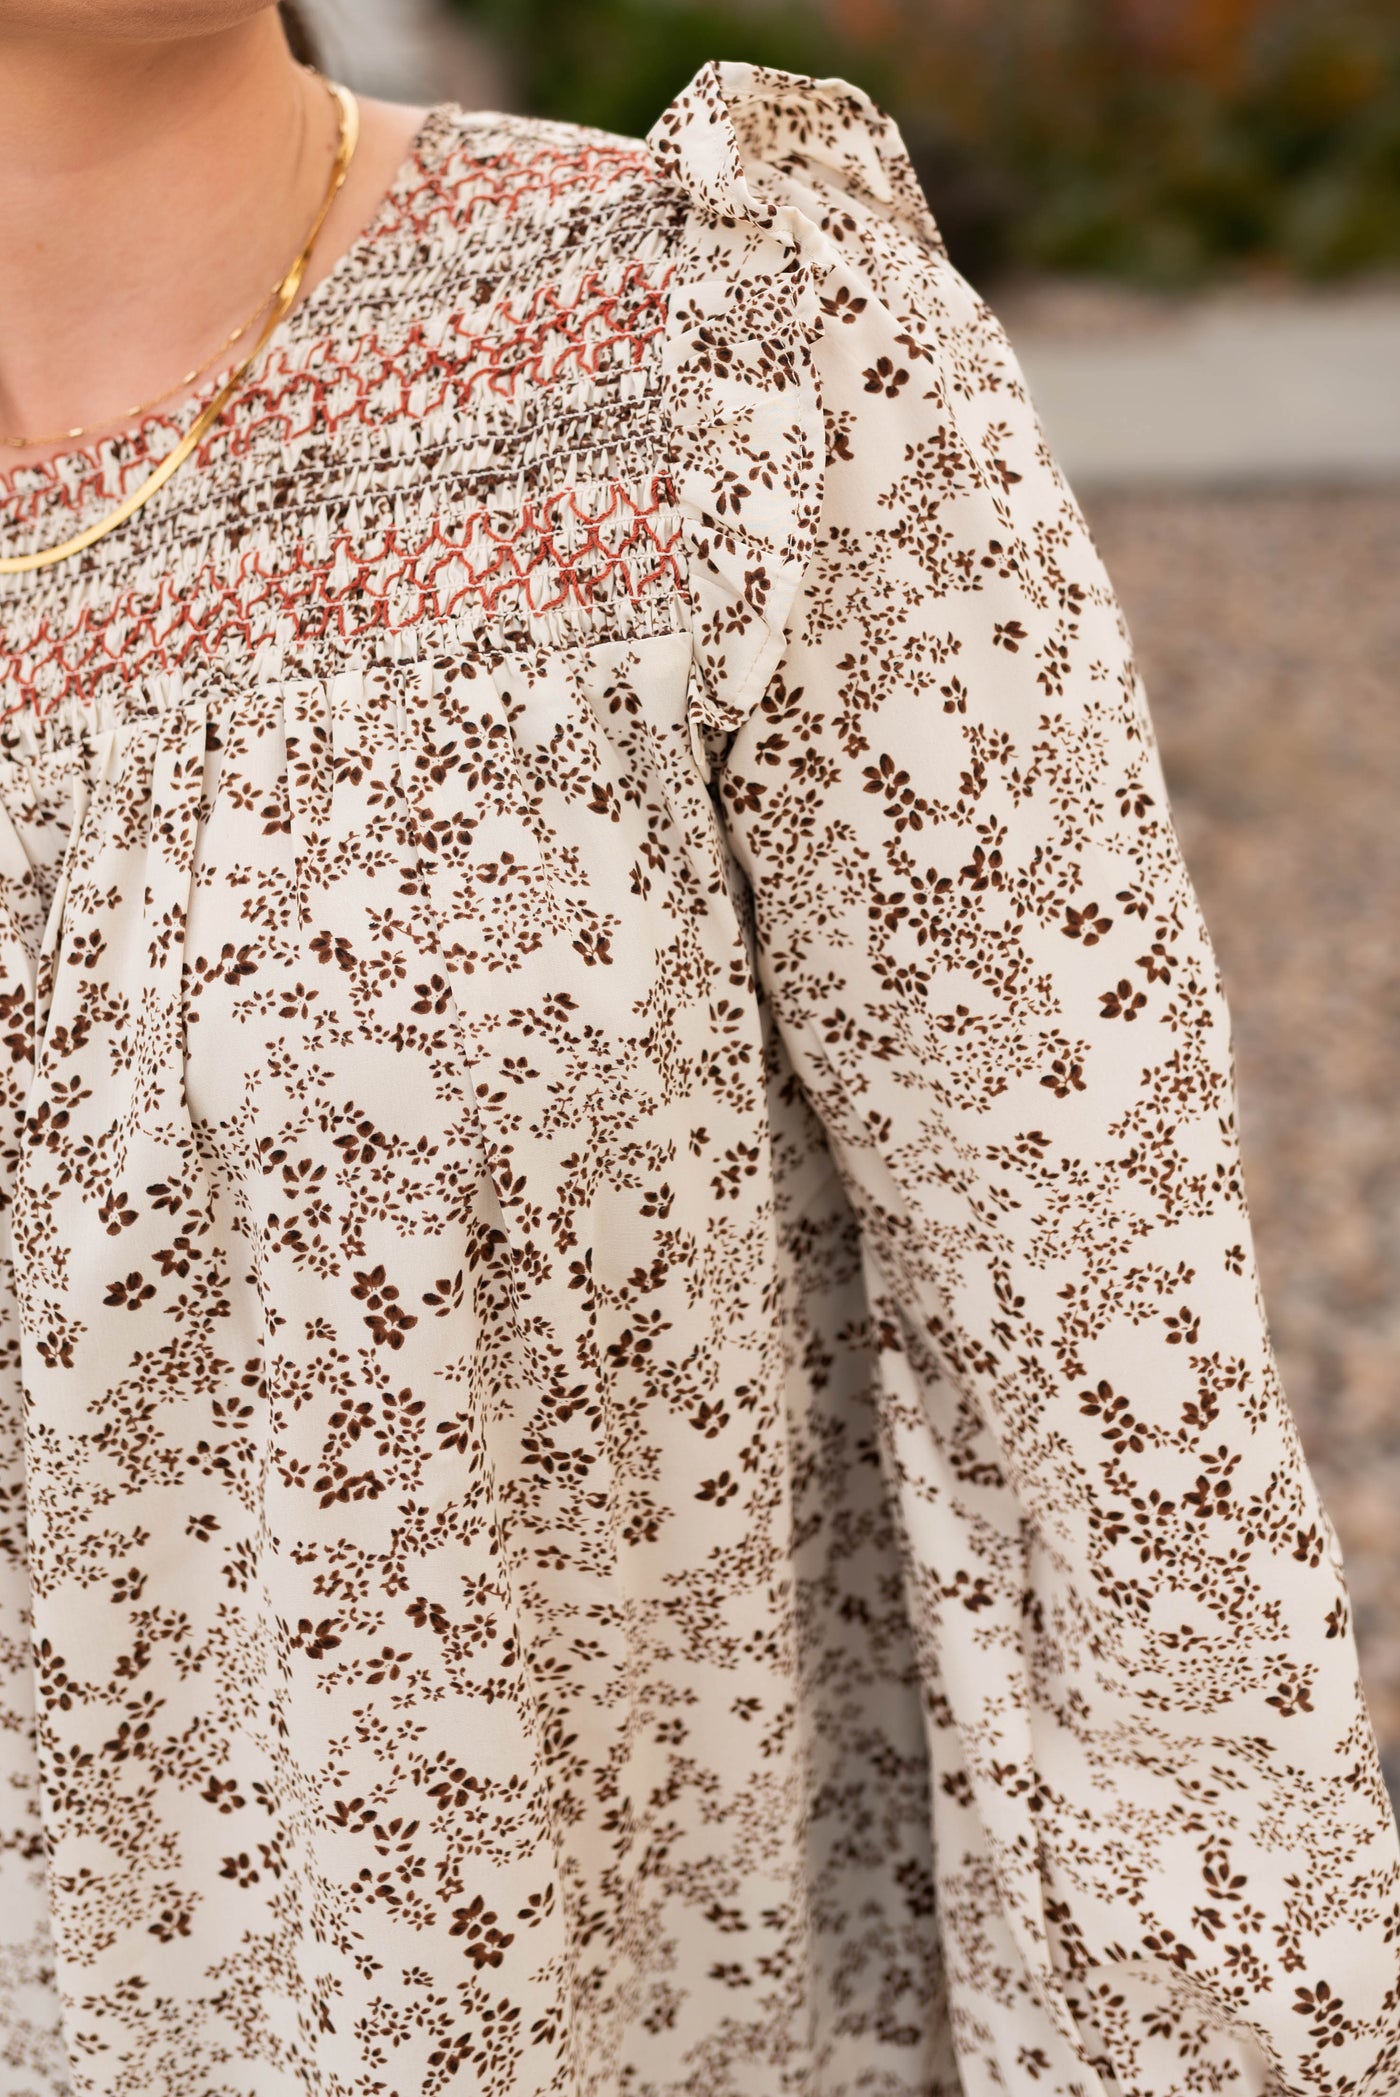 Taupe pattern blouse with embroidery stitching at the neck